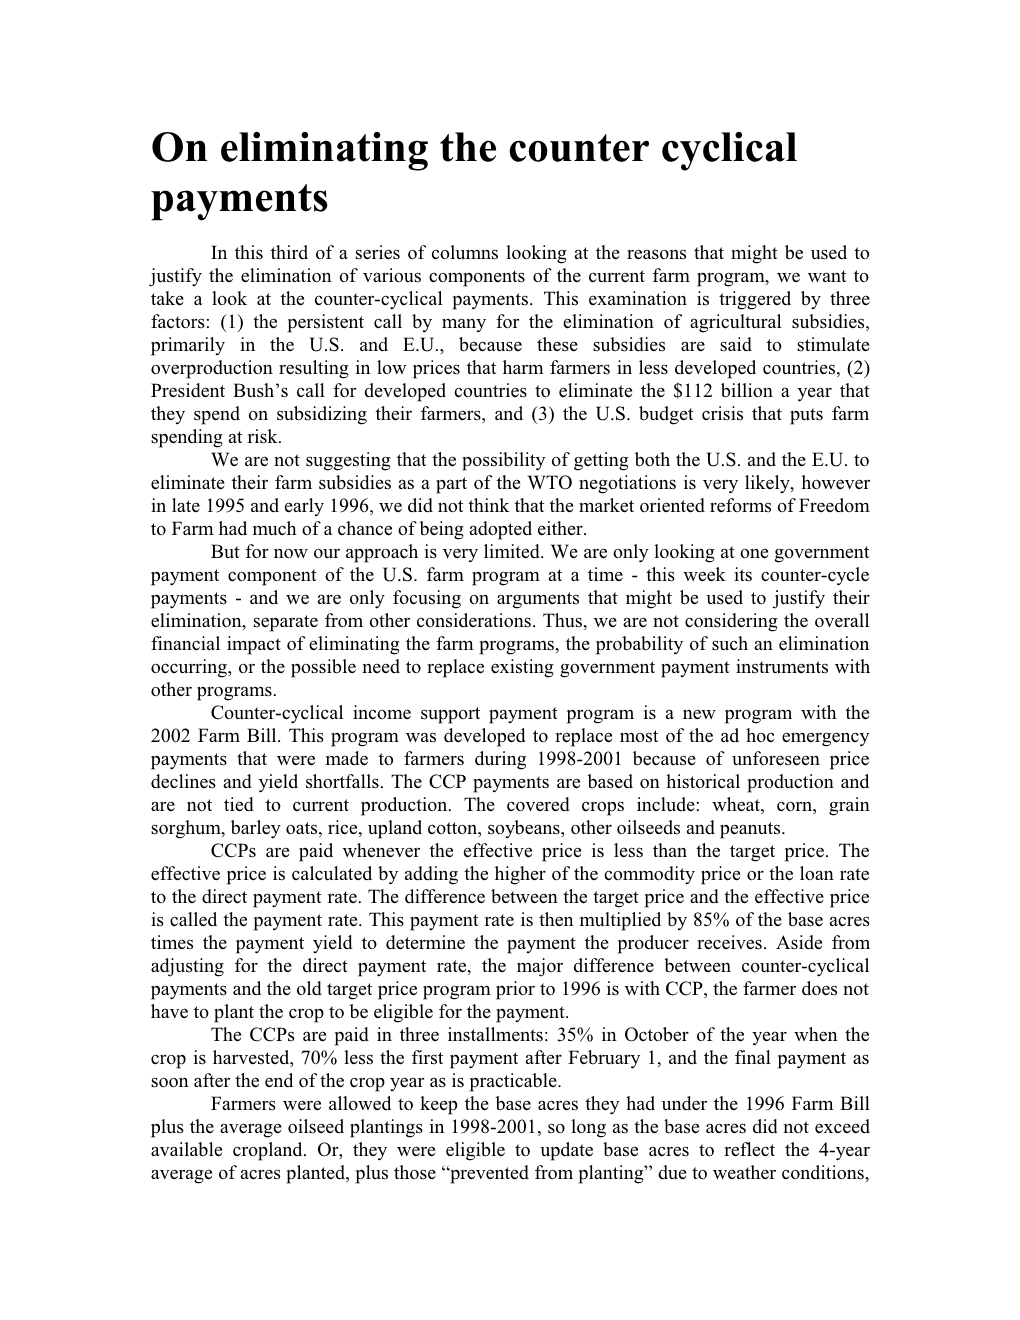 On Eliminating the Counter Cyclical Payments